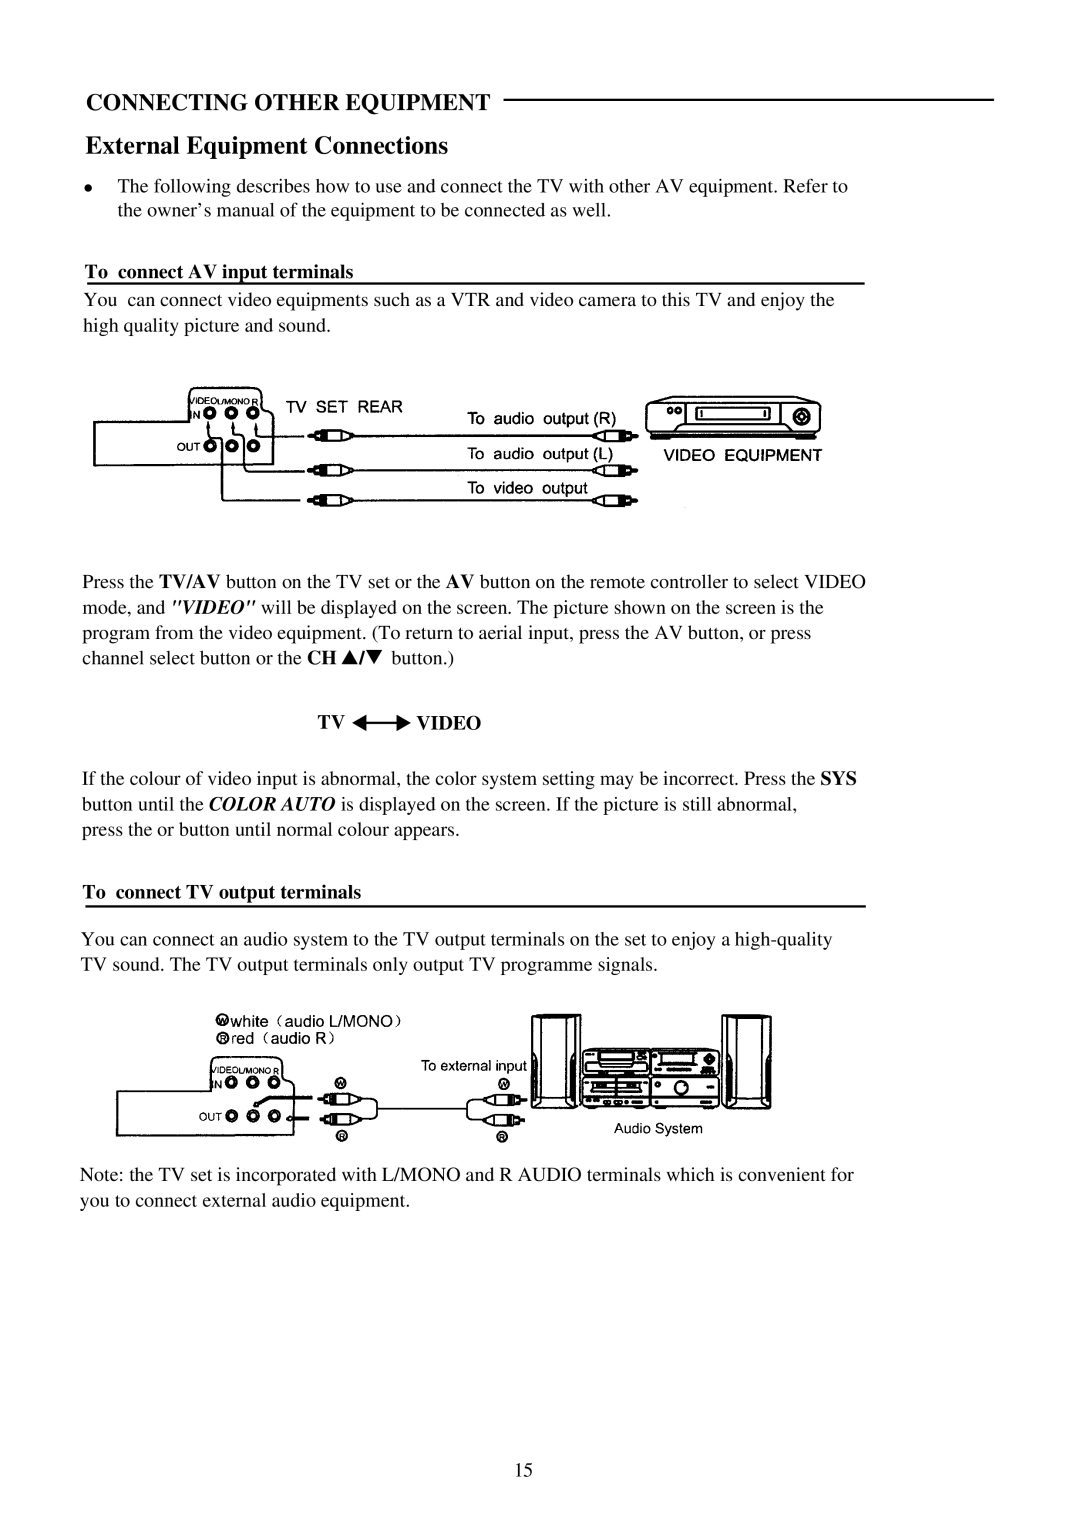 Palsonic 3410P owner manual External Equipment Connections, Connecting Other Equipment 